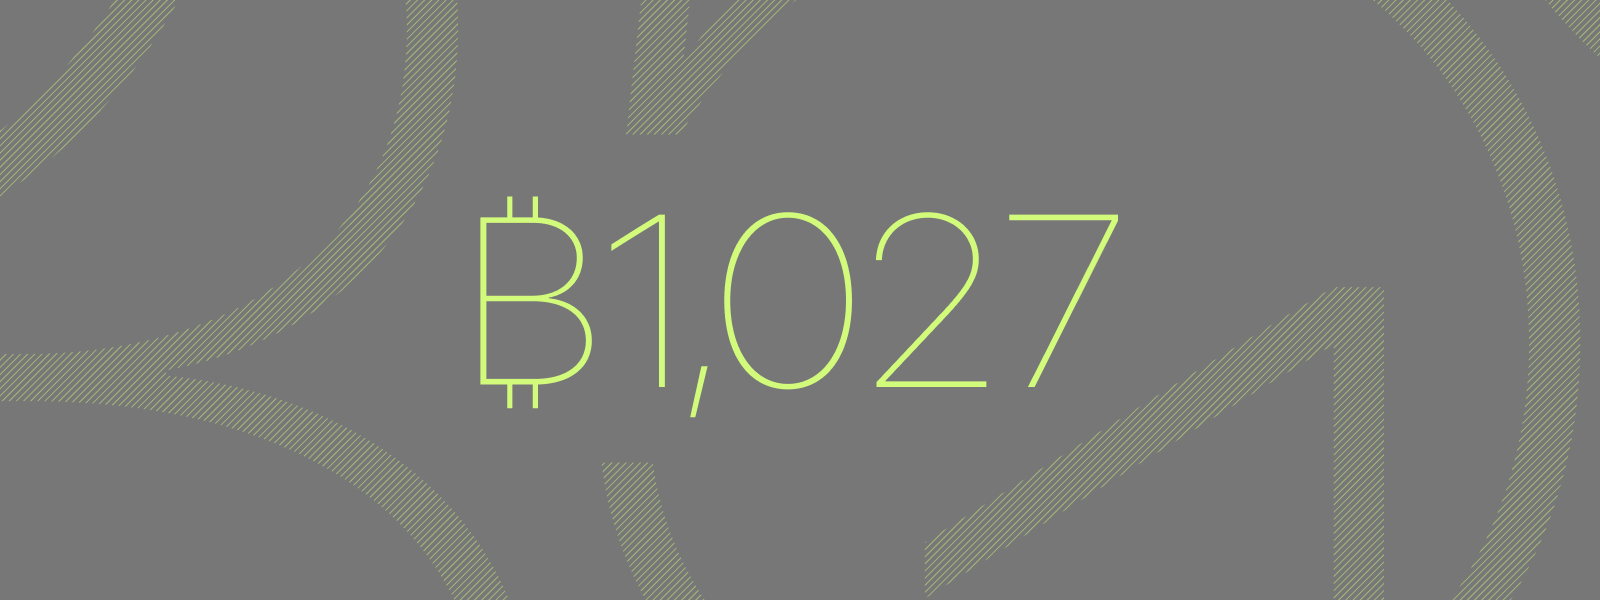 The amount 1,027 bitcoin in large letters.